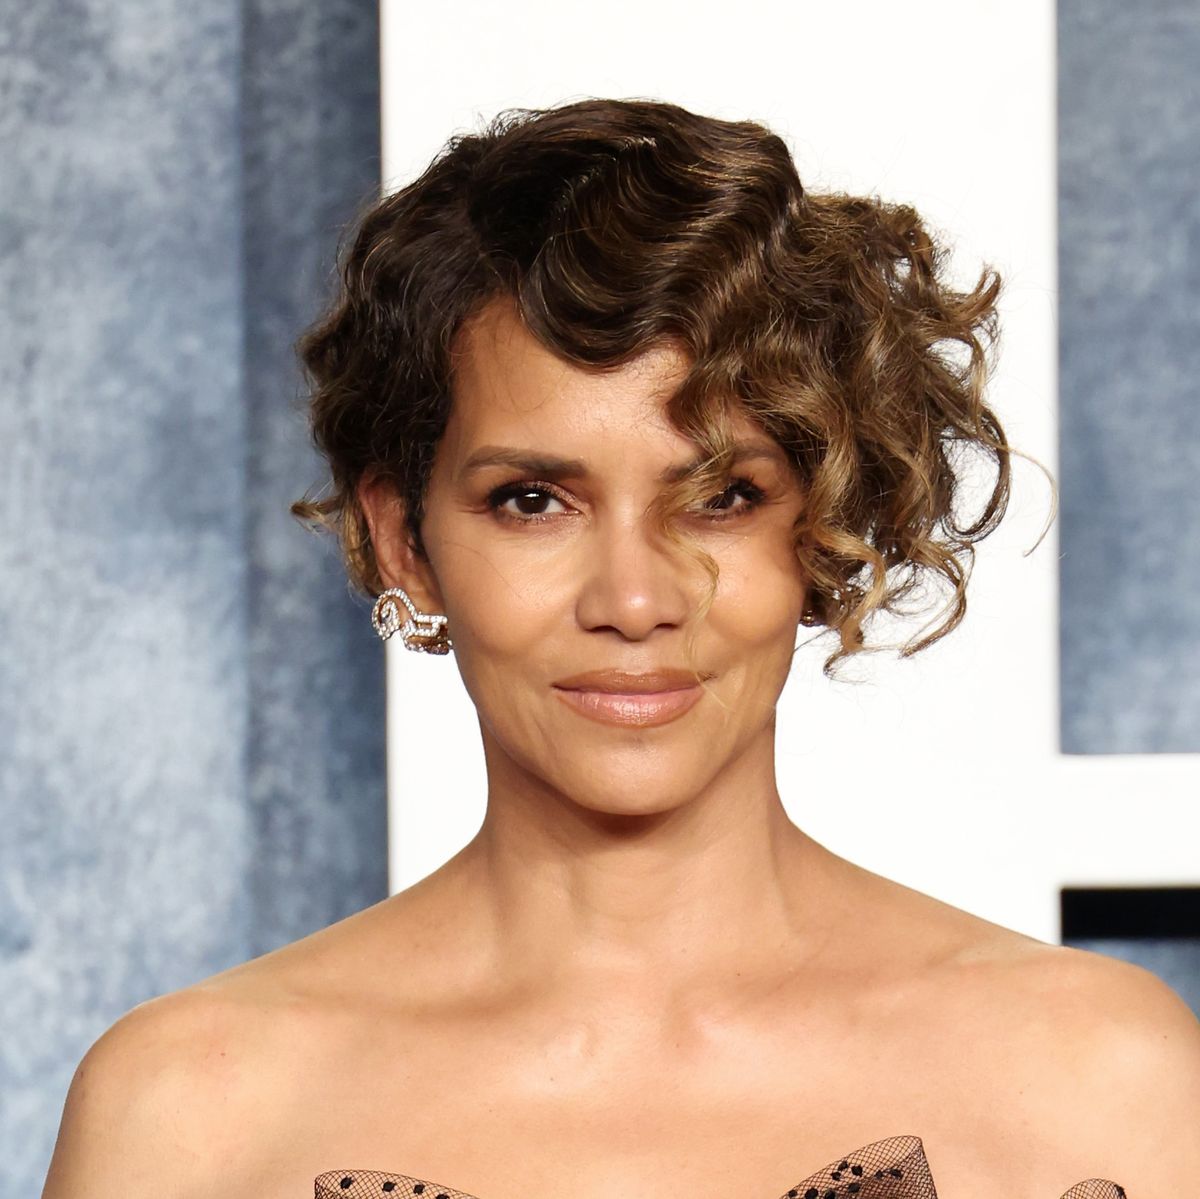 Halle Berry posted powerful afro selfie and looks so different